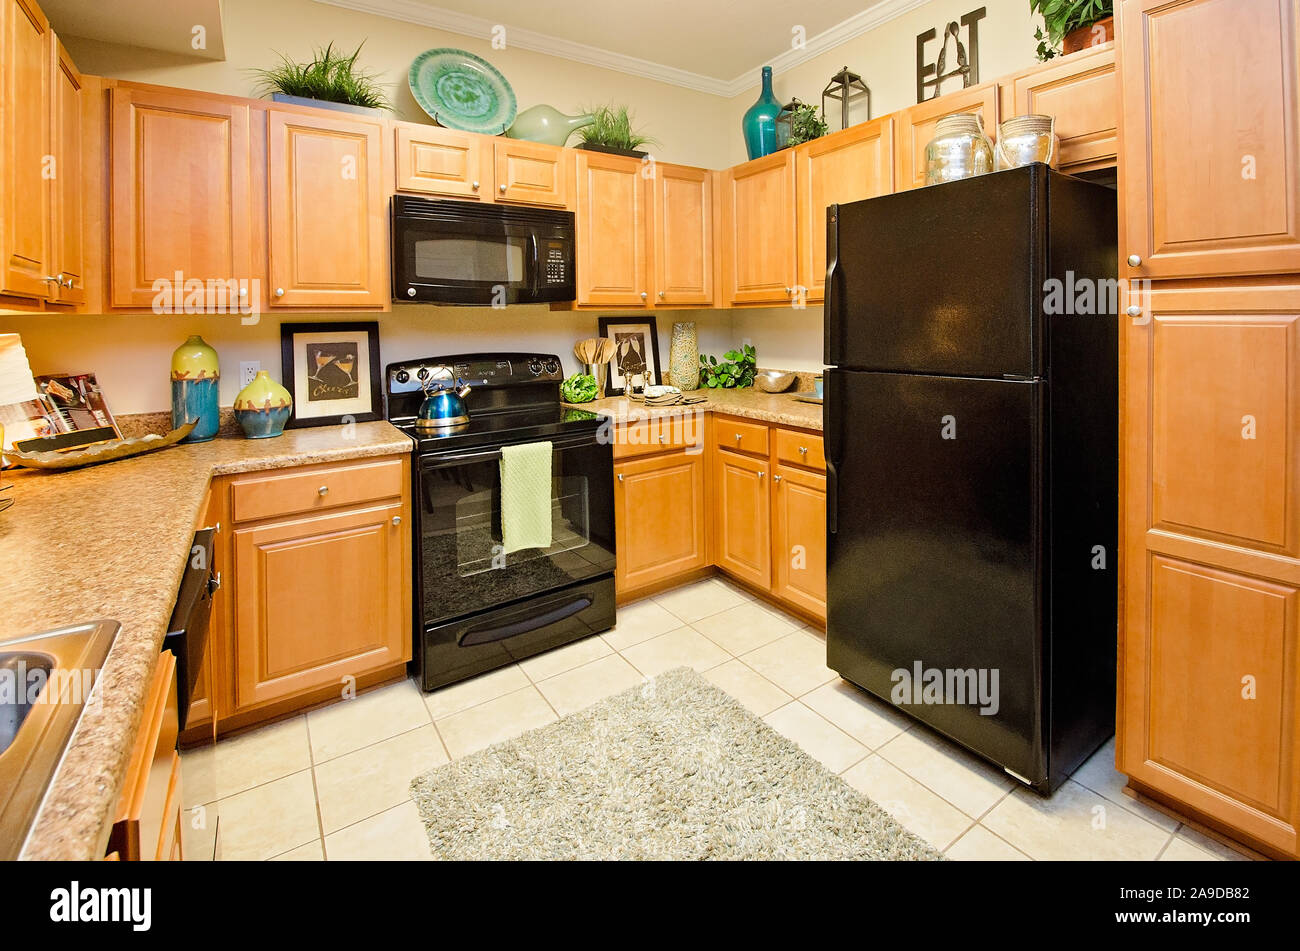 https://c8.alamy.com/comp/2A9DB82/the-kitchen-features-granite-countertops-electric-appliances-and-wood-cabinets-at-cypress-cove-apartment-homes-in-mobile-alabama-2A9DB82.jpg